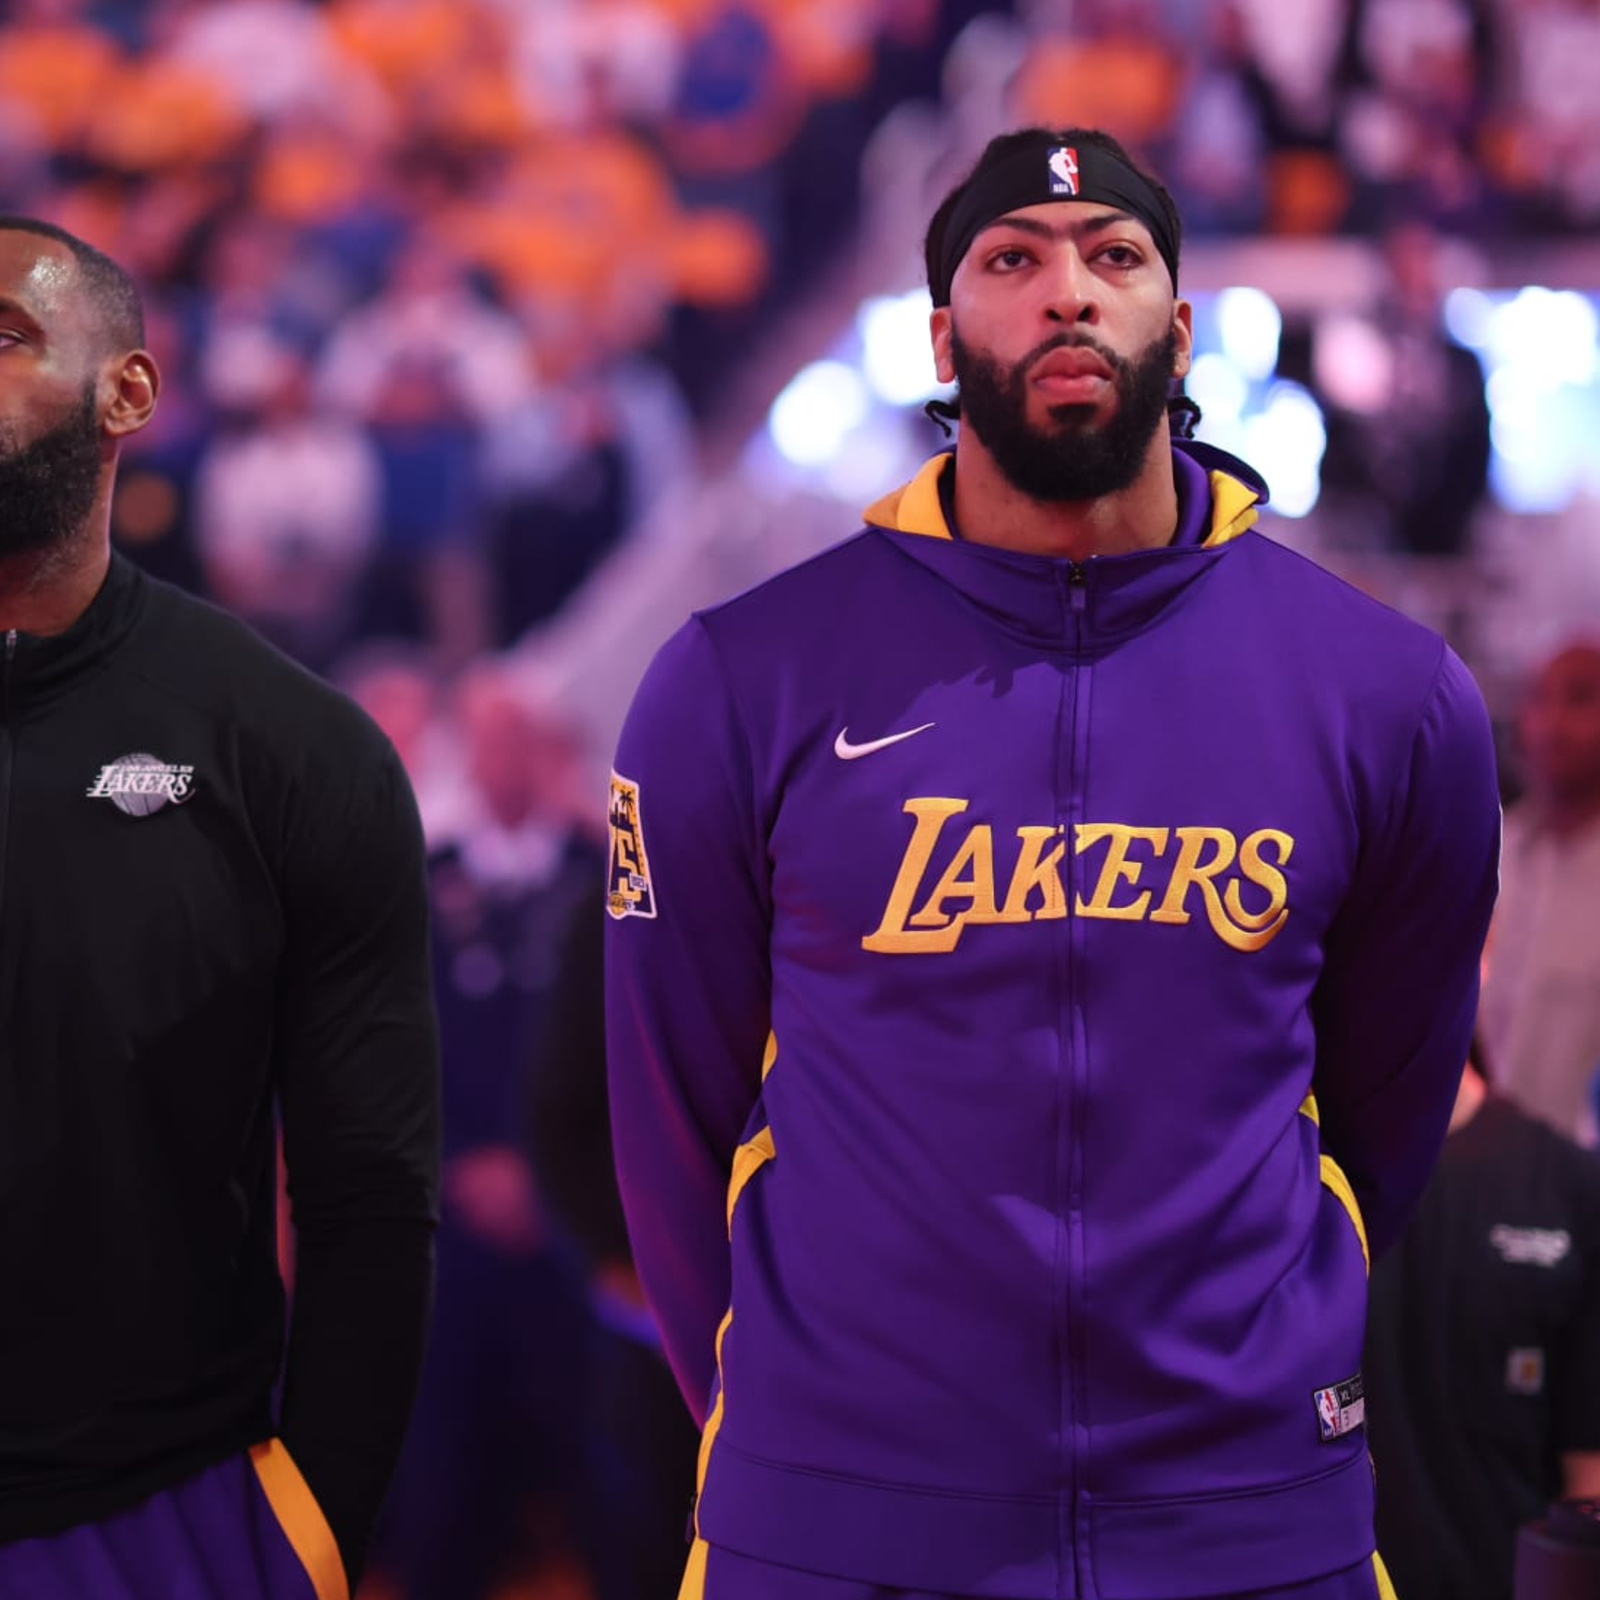 Lakers Rumors: LeBron James Wasn't Interested in Teams with Cap